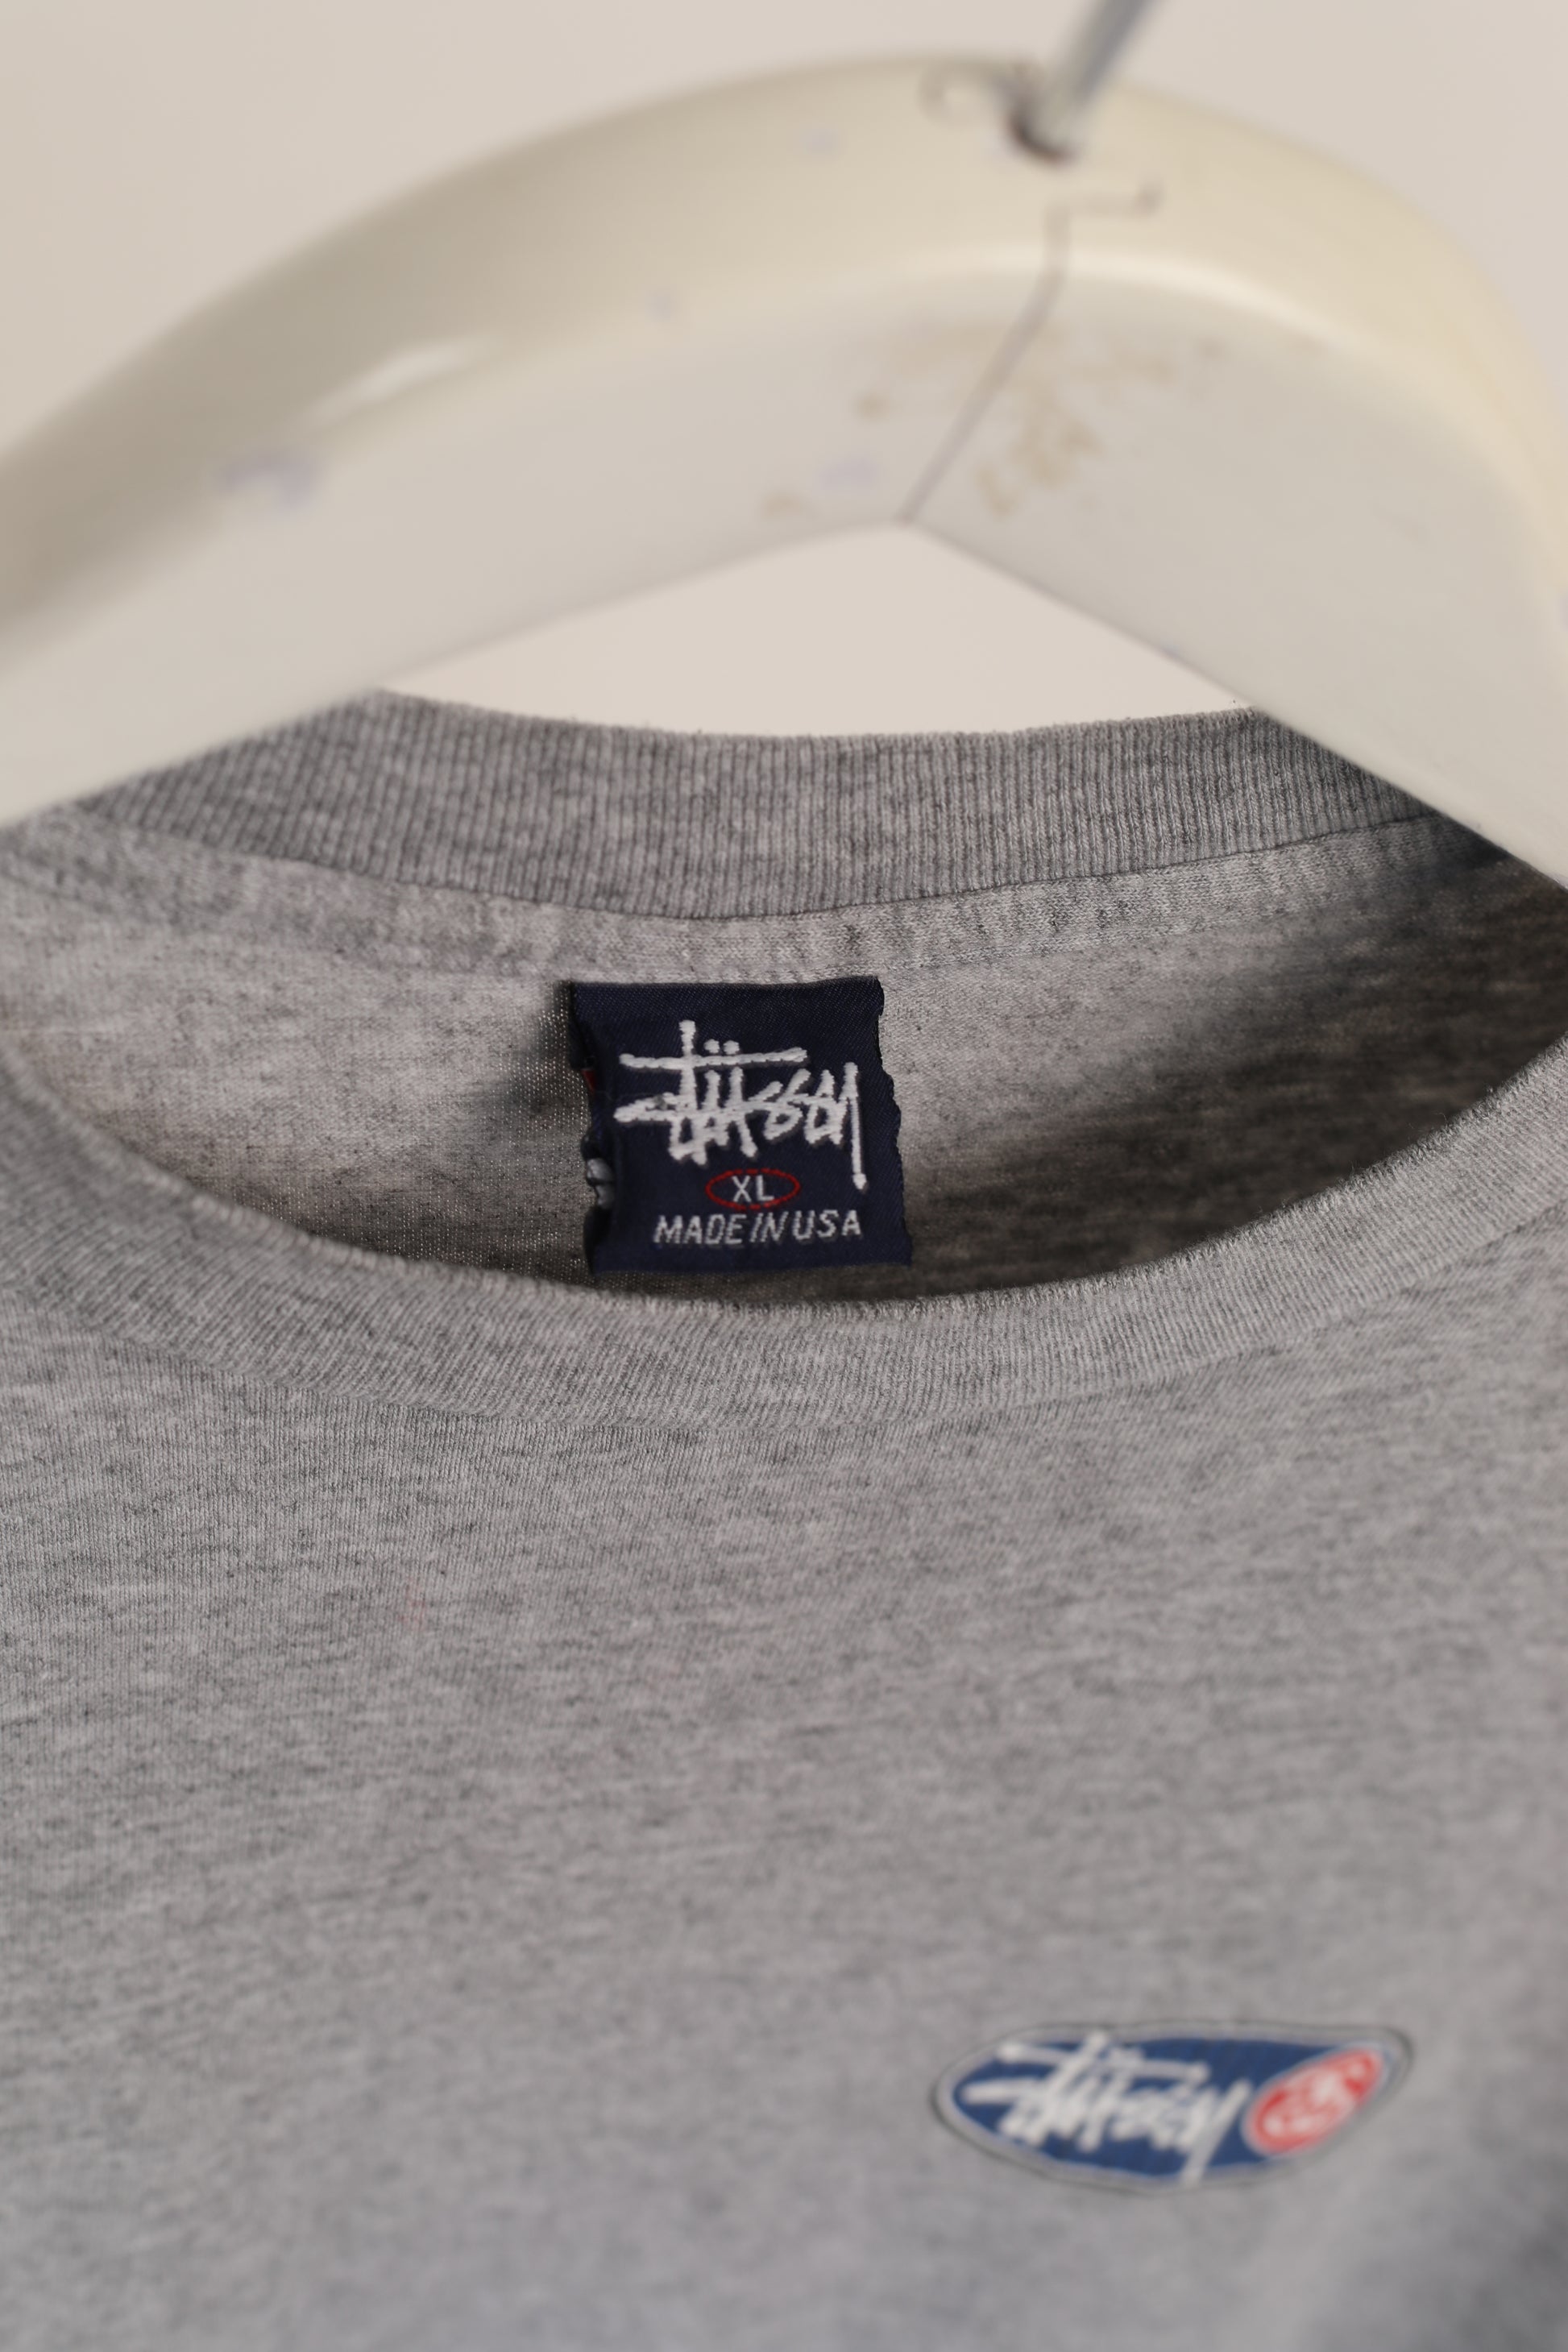 90s Stussy Long Sleeve single stitch T-shirt - Made in USA (XL